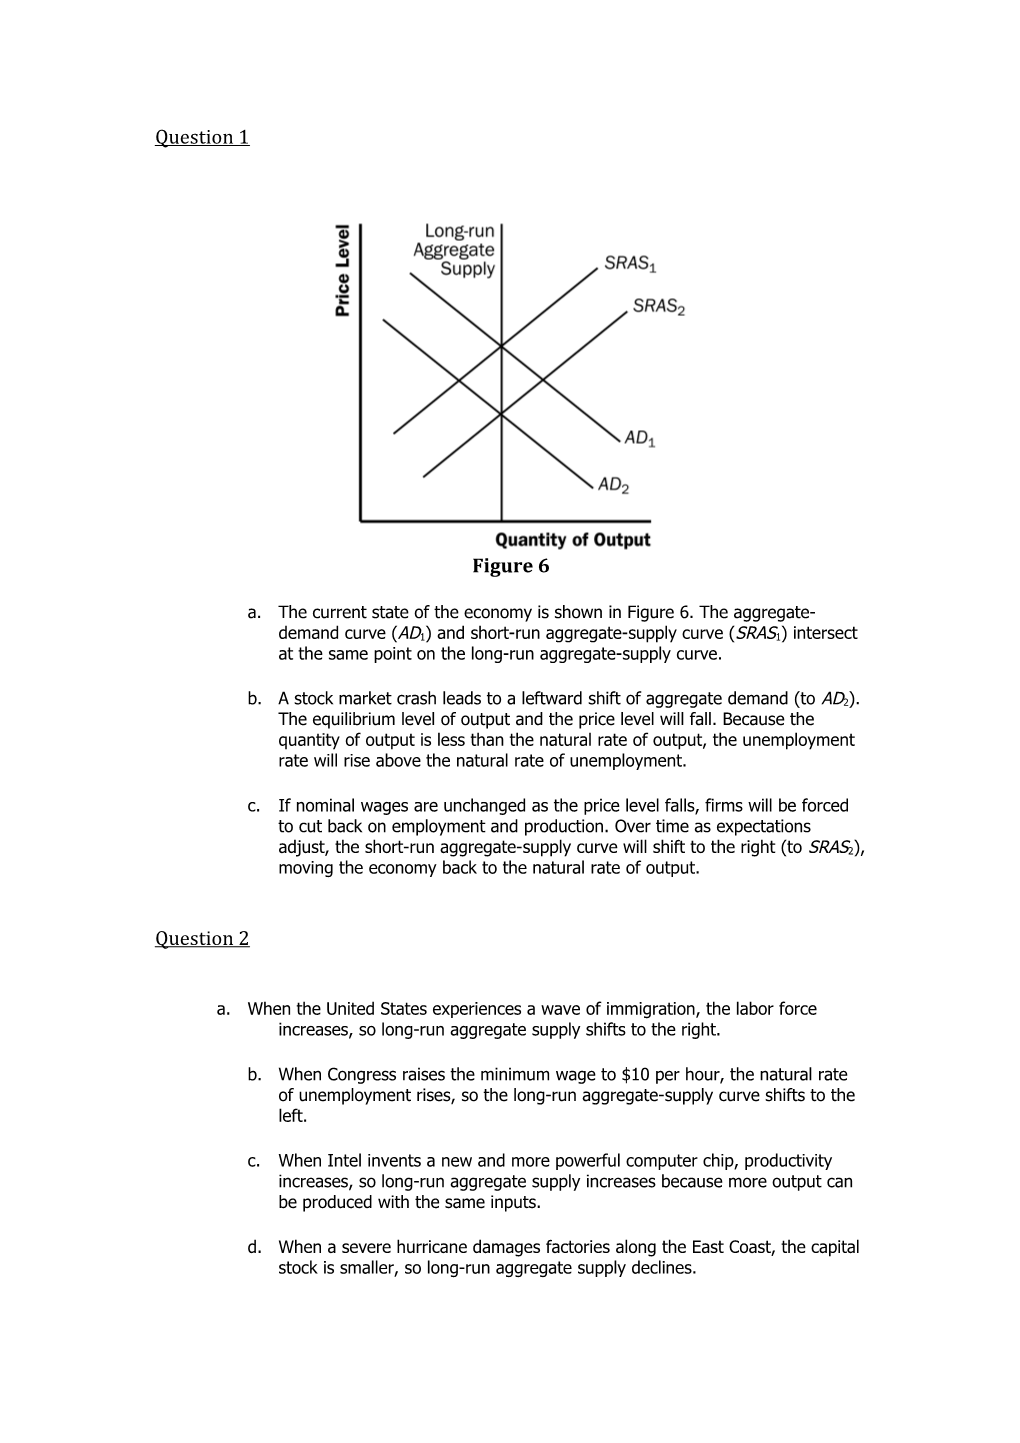 A.The Current State of the Economy Is Shown in Figure 6. the Aggregate-Demand Curve (AD1)